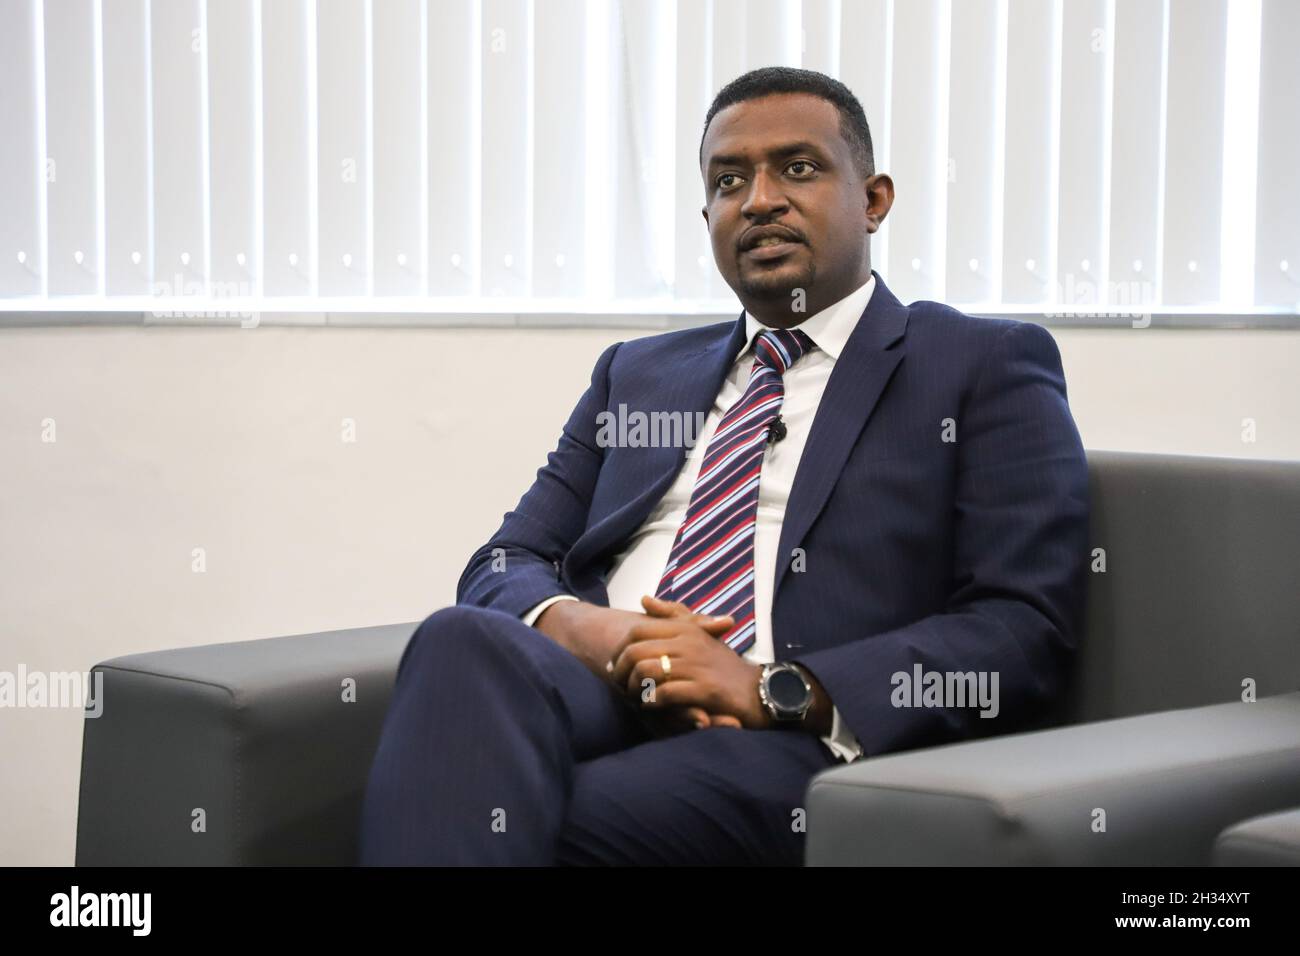 Addis Ababa, Ethiopia. 14th Oct, 2021. Israel Degfa, the CEO of Kerchanshe Trading Private Limited Company (PLC), speaks during an interview with Xinhua in Addis Ababa, Ethiopia, on Oct. 14, 2021. Kerchanshe Trading Private Limited Company (PLC), the largest producer and exporter of coffee in Ethiopia, says the upcoming 4th China International Import Expo (CIIE) will create a huge opportunity for coffee-producing and exporting companies. Credit: Michael Tewelde/Xinhua/Alamy Live News Stock Photo